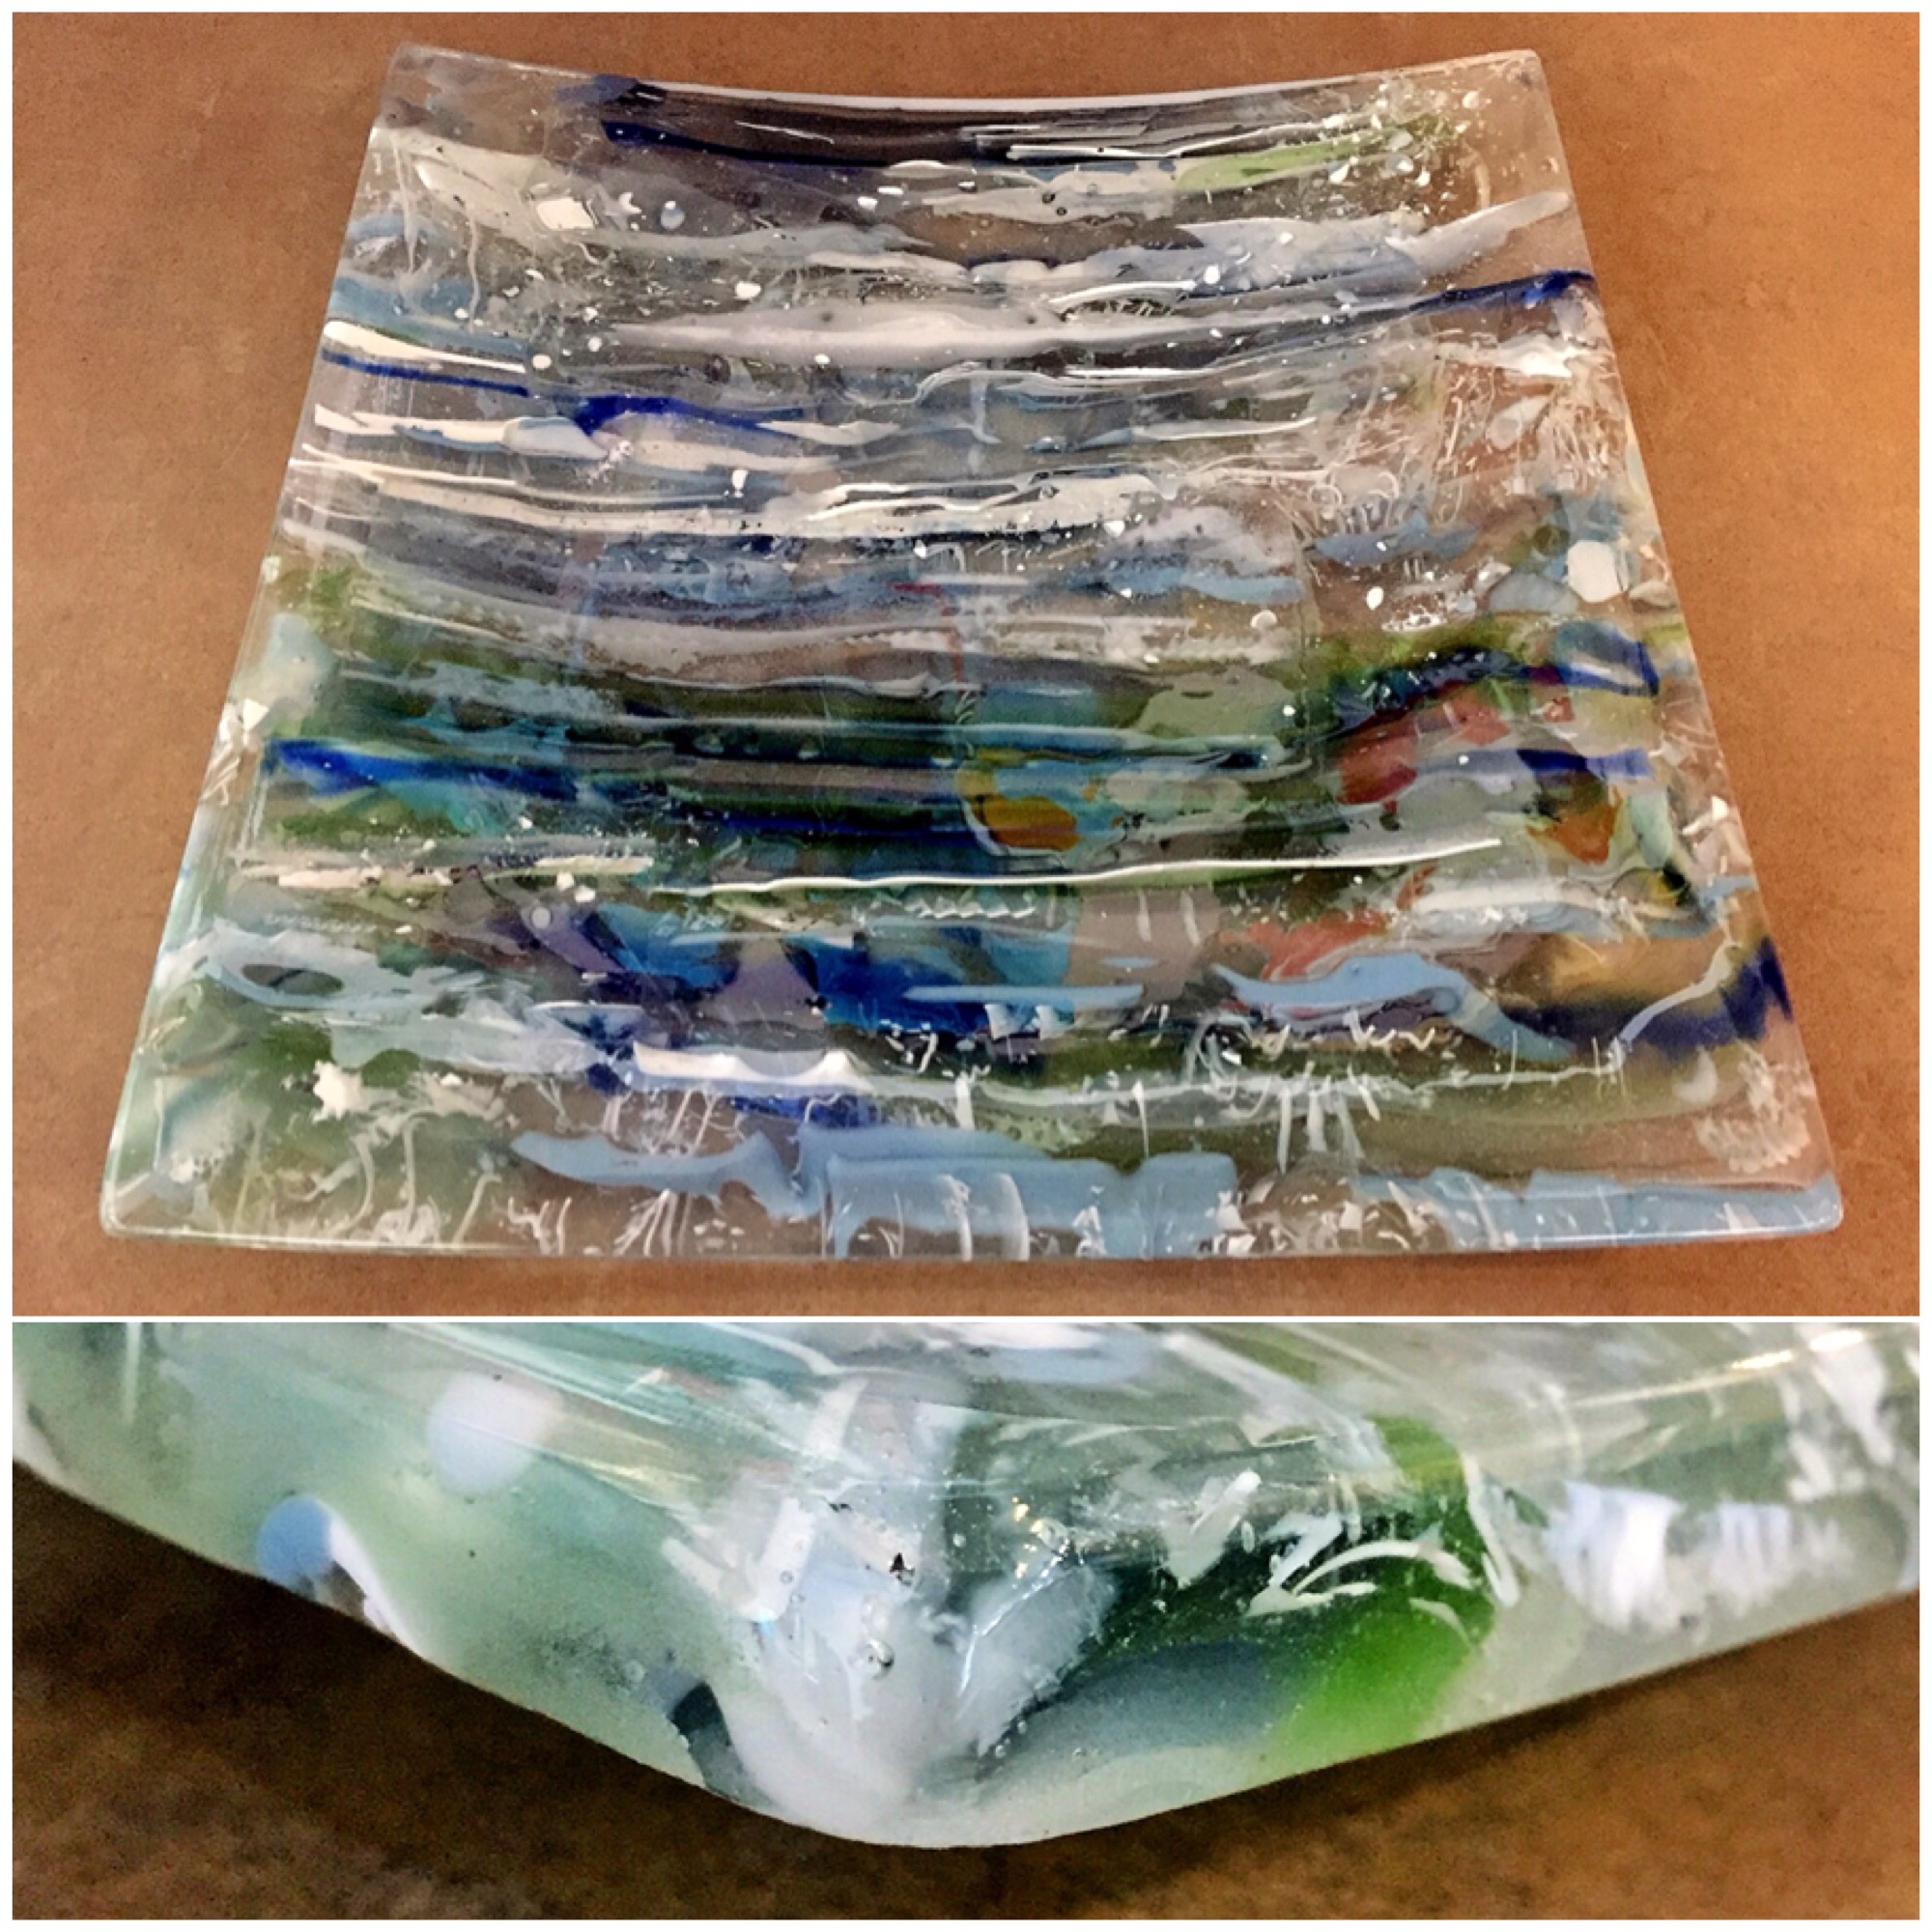 Wetland Reflections, cast glass platter by Heather Cuell | Effusion Art Gallery + Cast Glass Studio, Invermere BC